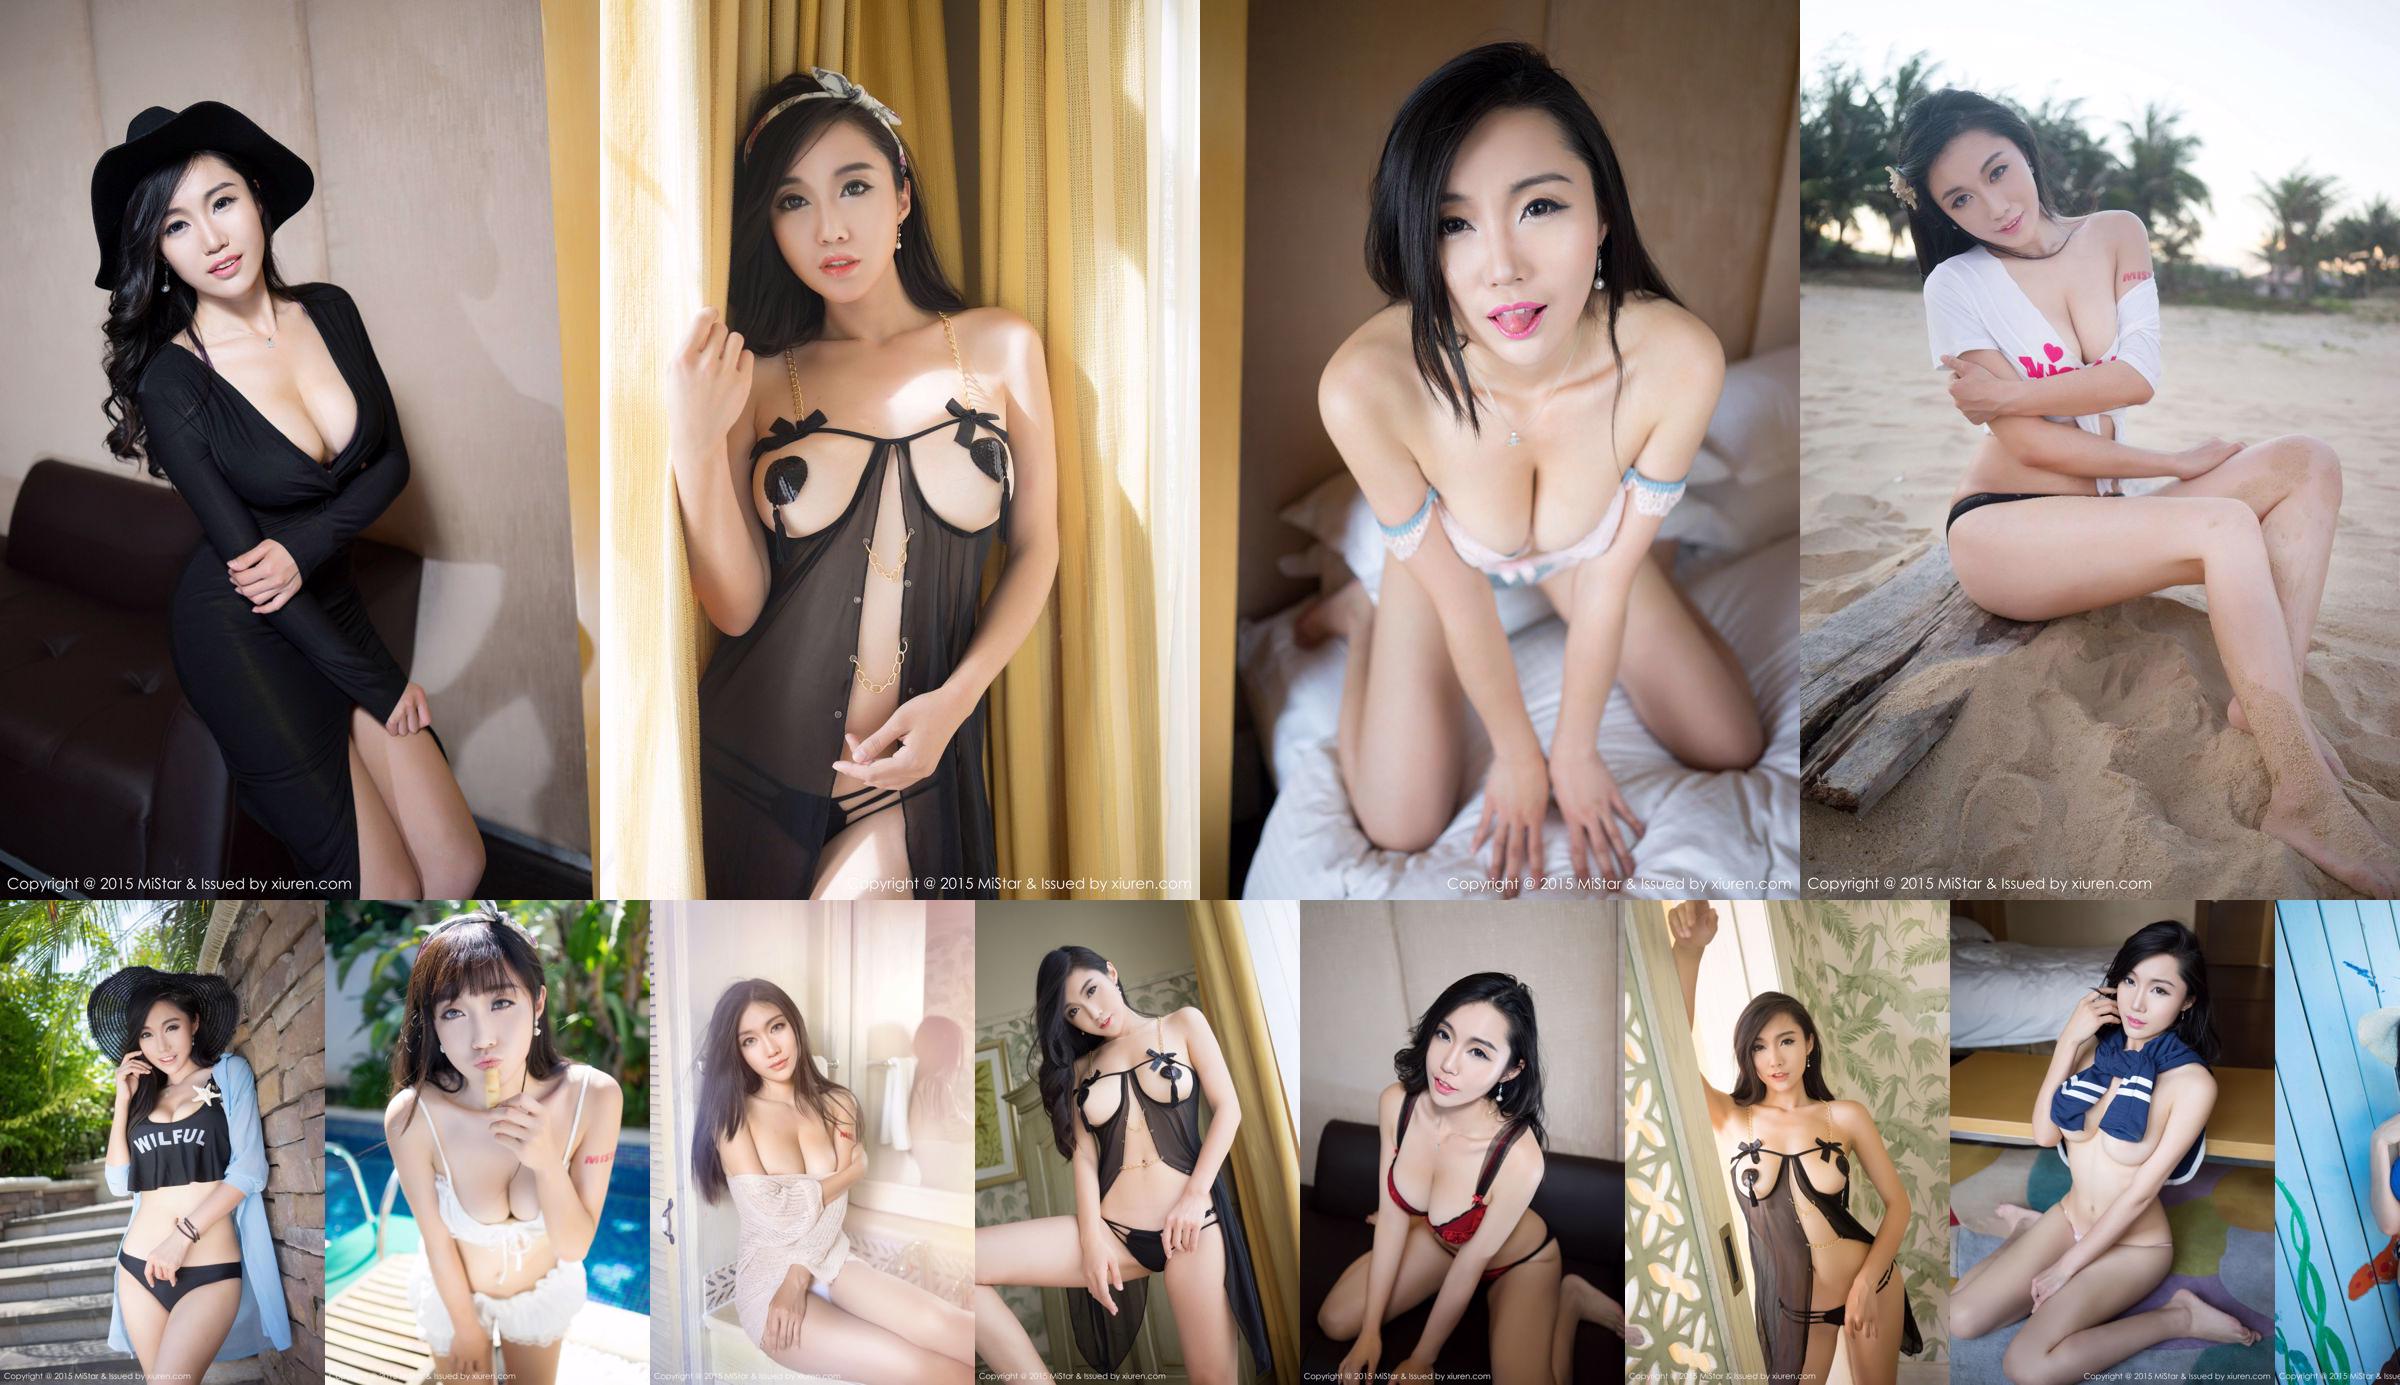 Bling "Sexy Nightwear + High Chase Temptation" [Youmihui YouMi] Vol.032 No.2b26be Page 1